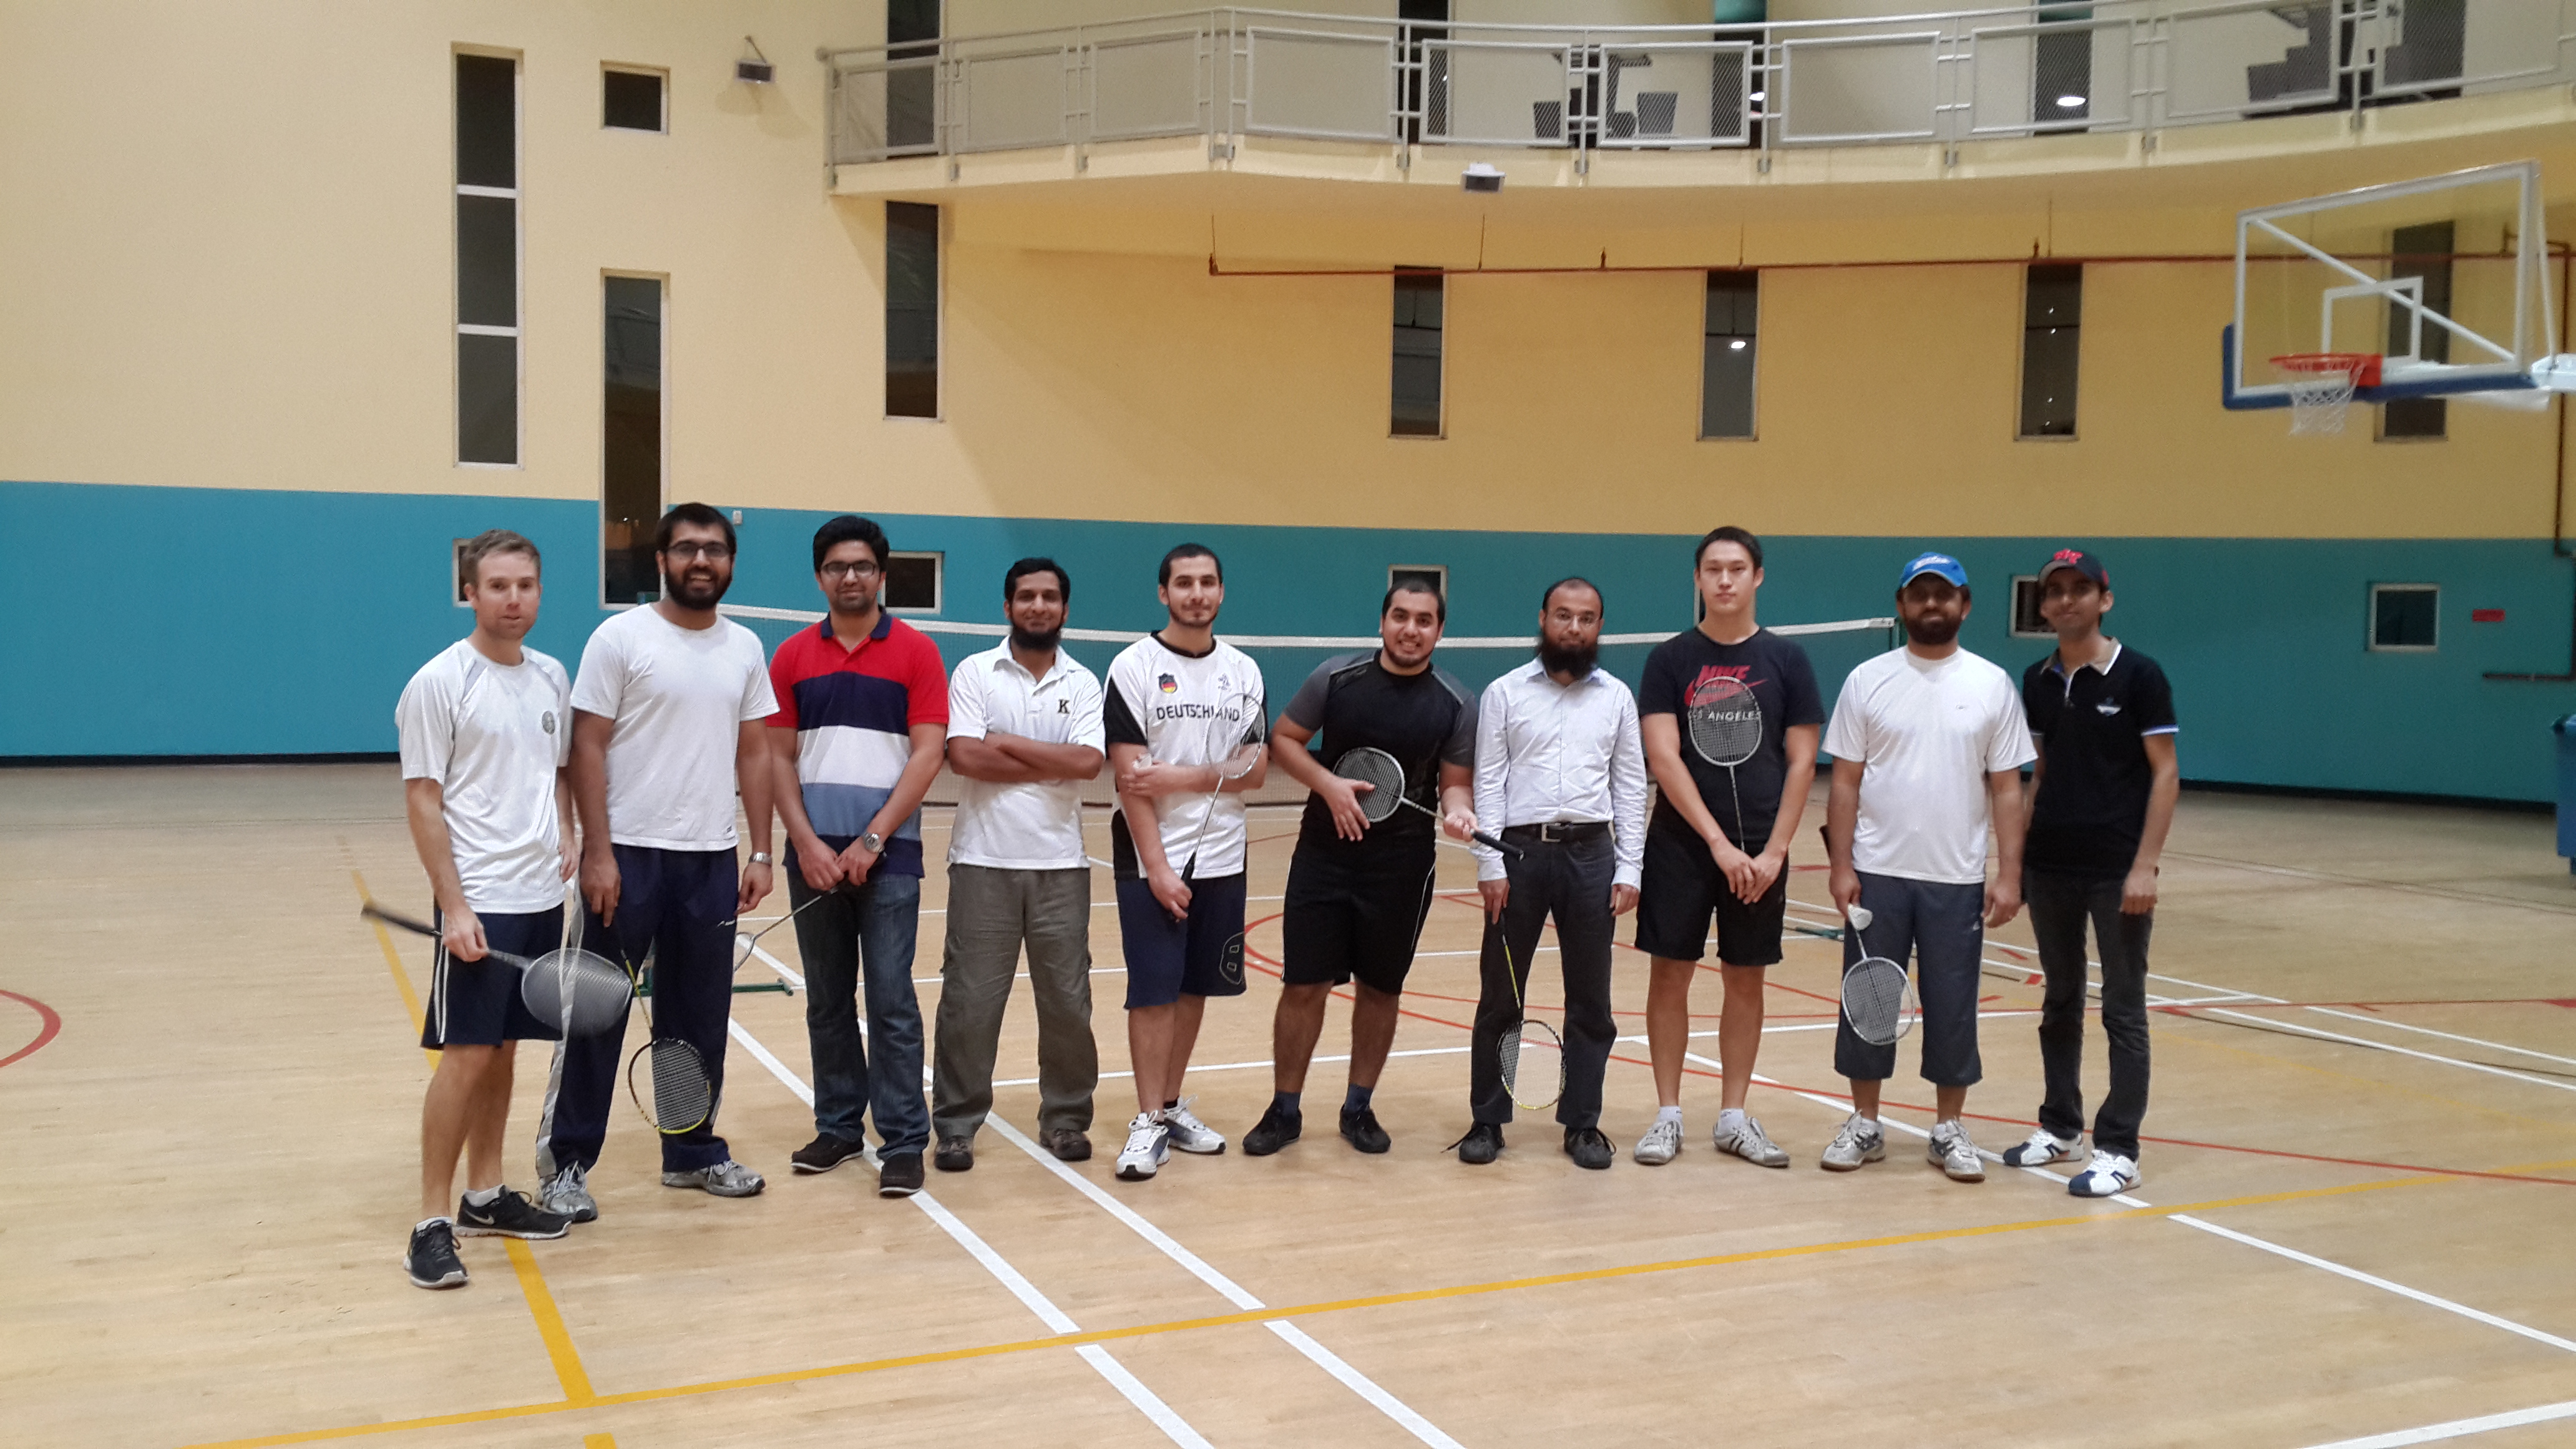 KAUST CEMSE EE IMPACT Group Badminton Event